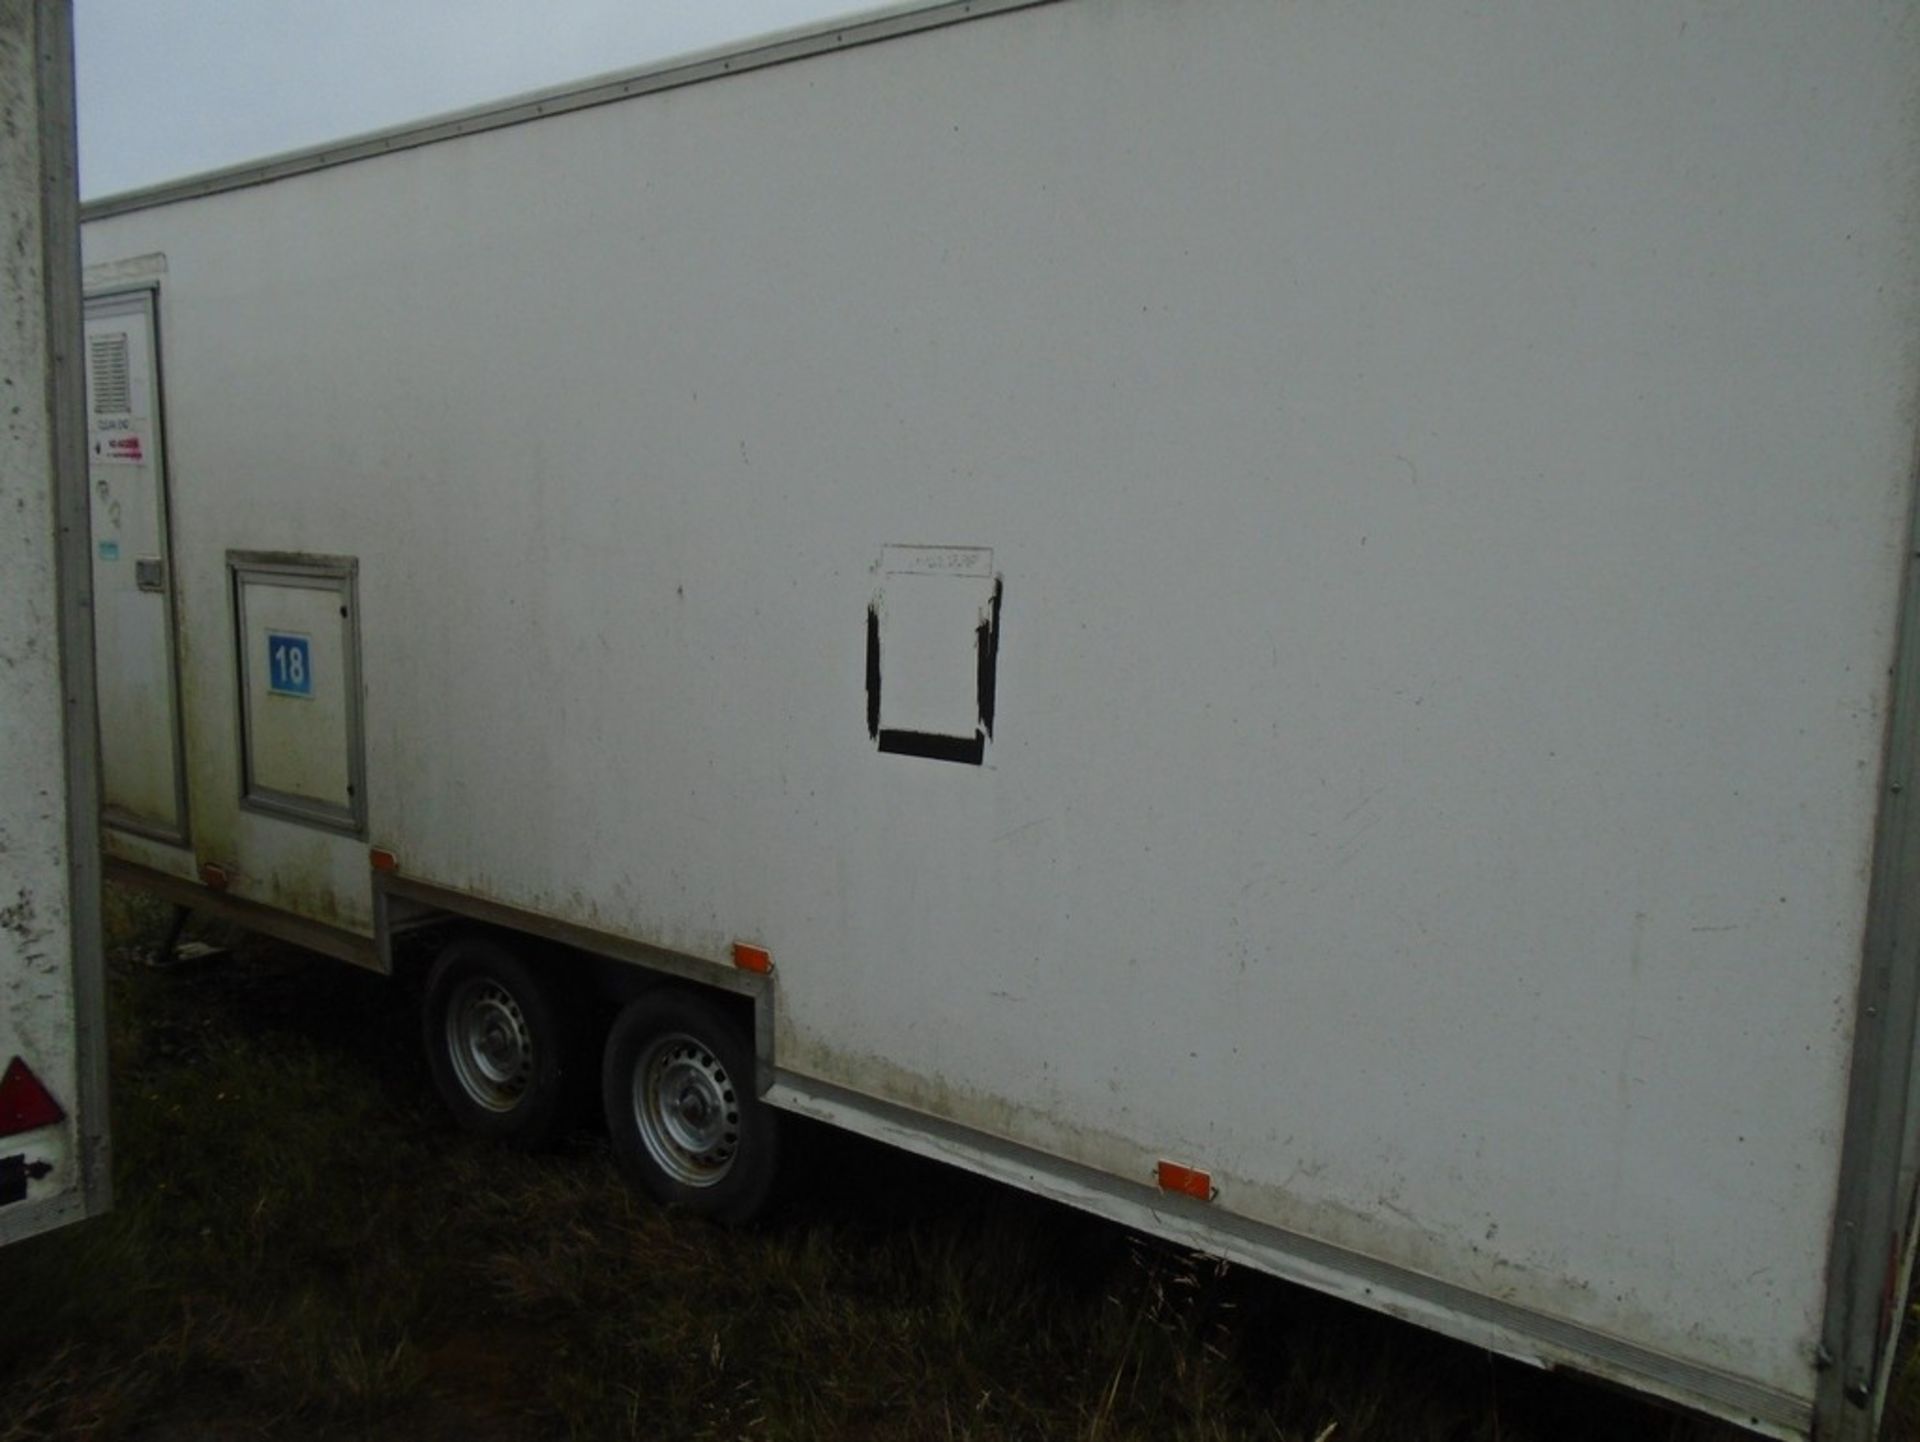 2 X TWIN AXLE FIBREGLAS BODY SHOWER/WELLFARE UNIT TRAILERS (USED FOR ASBESTOS CLEAN UP) - Image 7 of 13